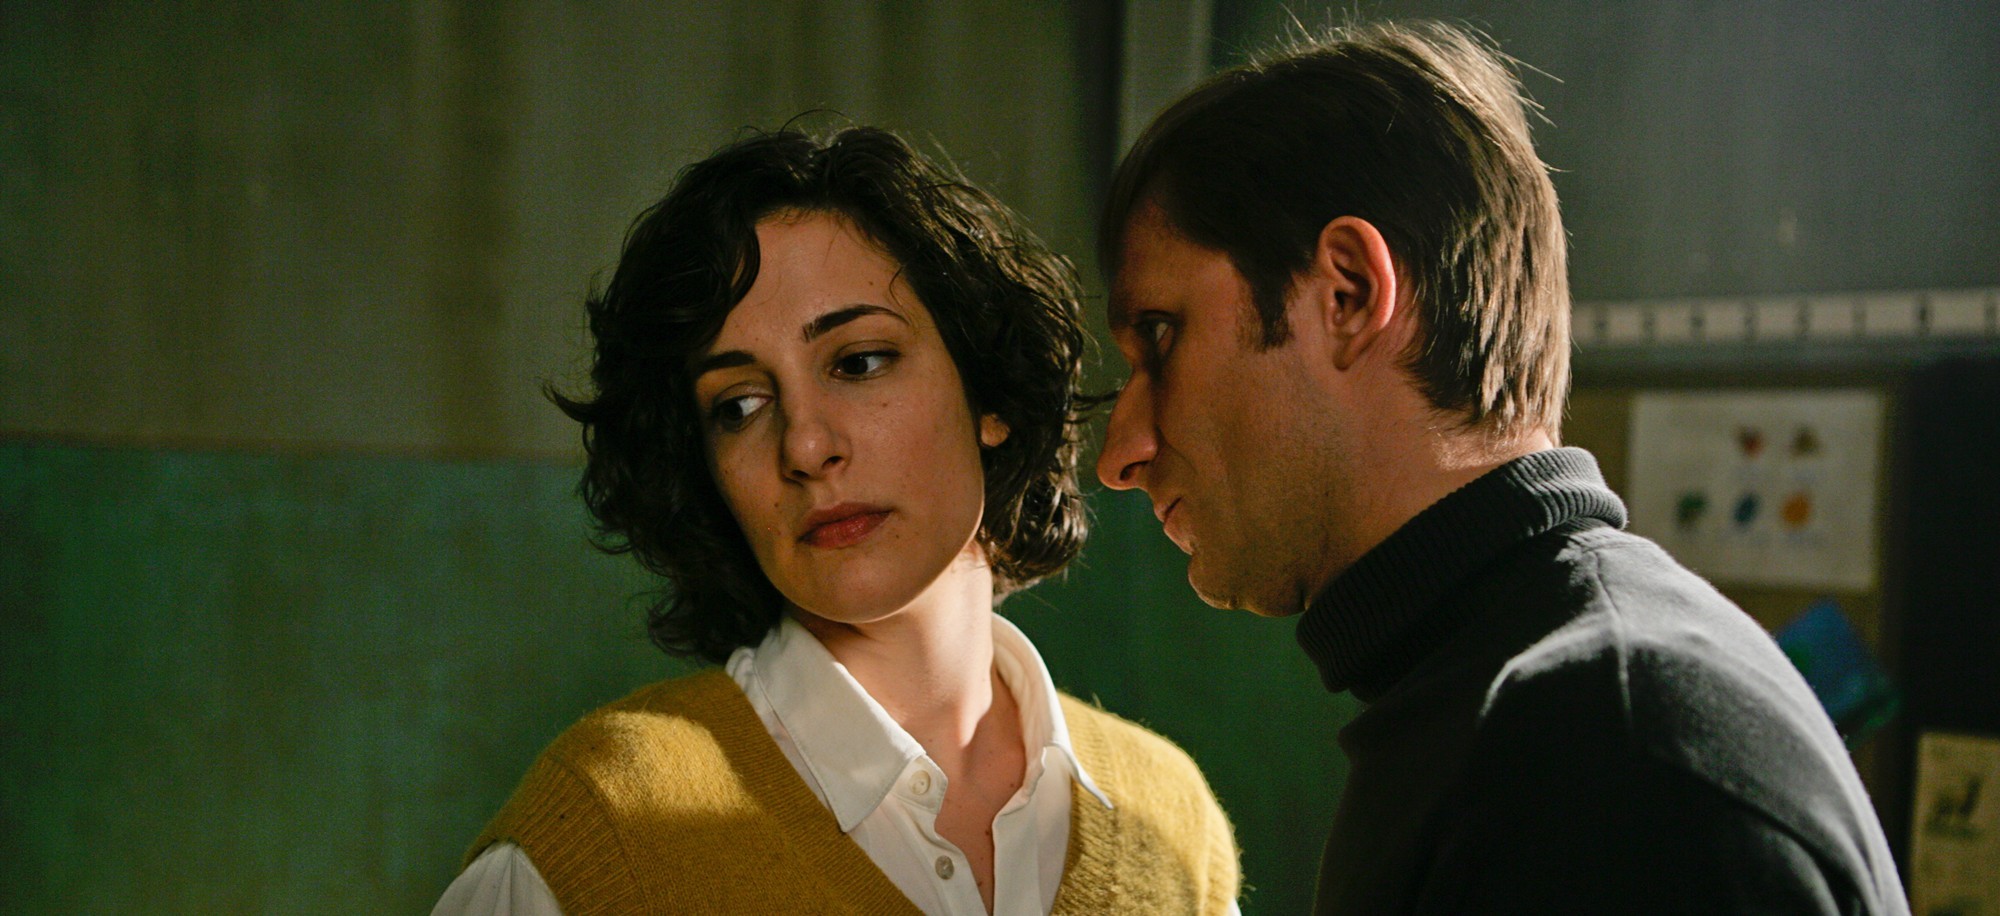 Zana Marjanovic stars as Ajla and Goran Kostic stars as Danijel in FilmDistrict's In the Land of Blood and Honey (2011). Photo credit by Dean Semler.